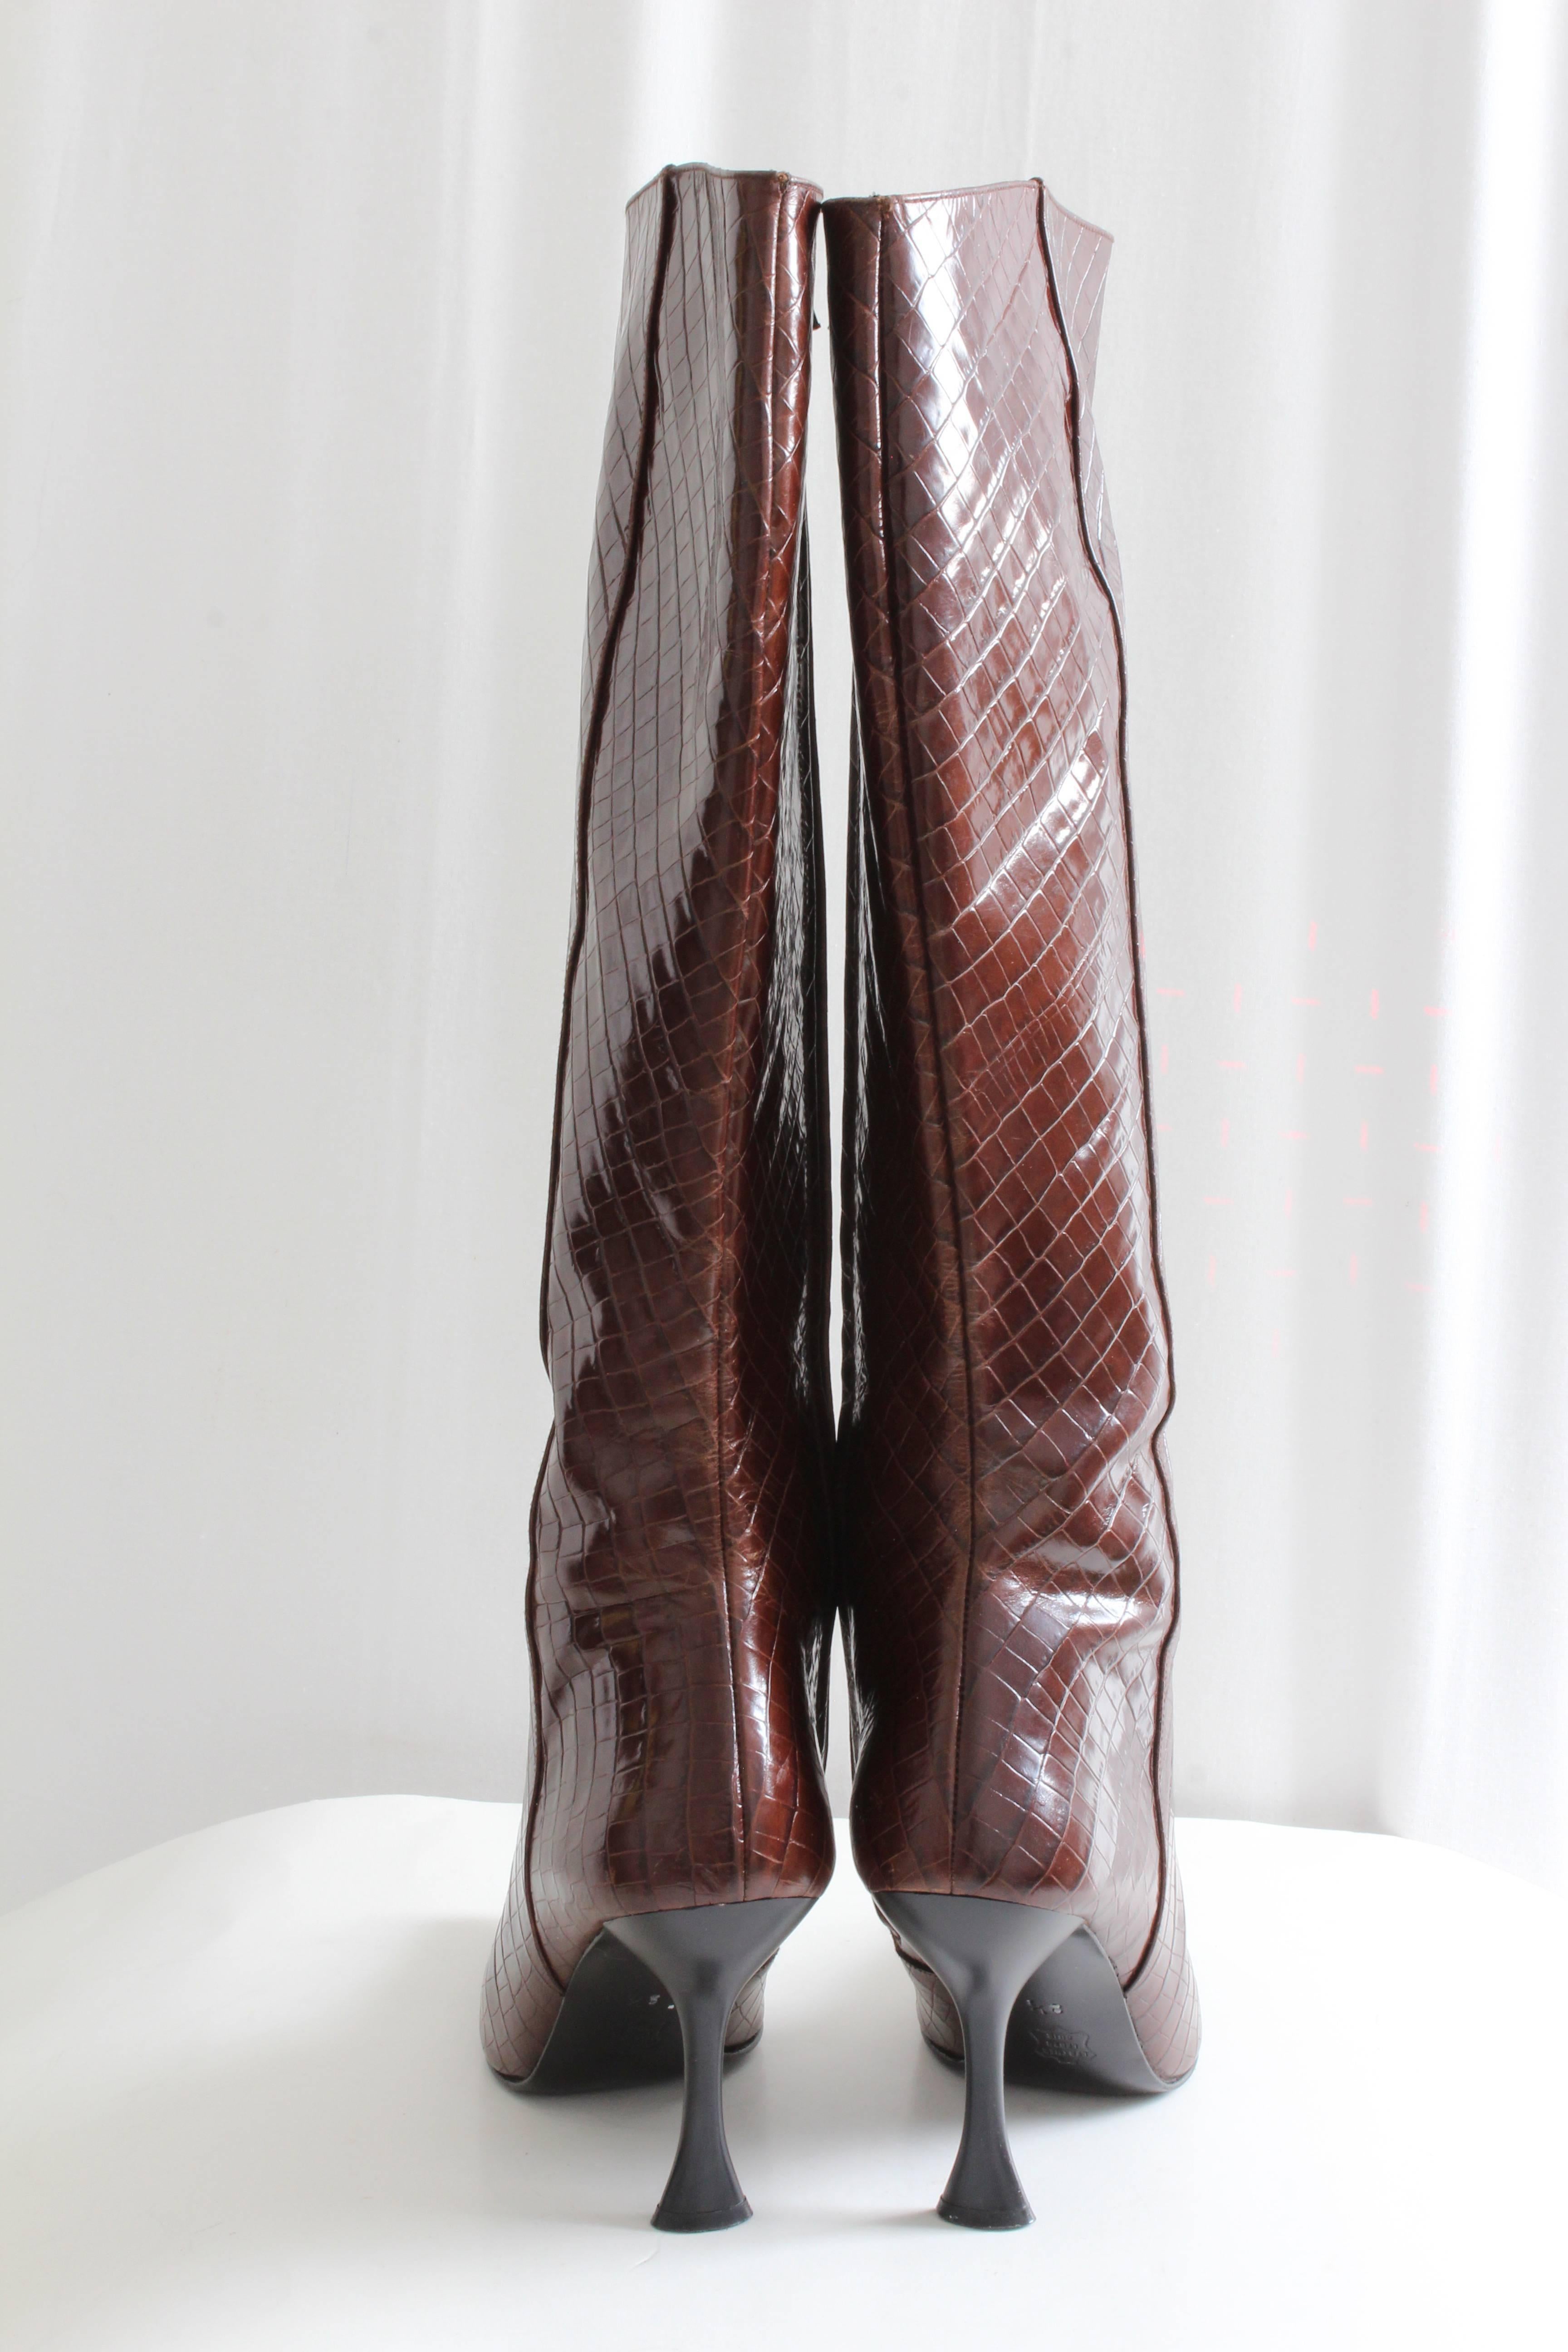 Brown Charles Jourdan Croc Embossed Glossy Leather Boots Knee High Size 8.5M